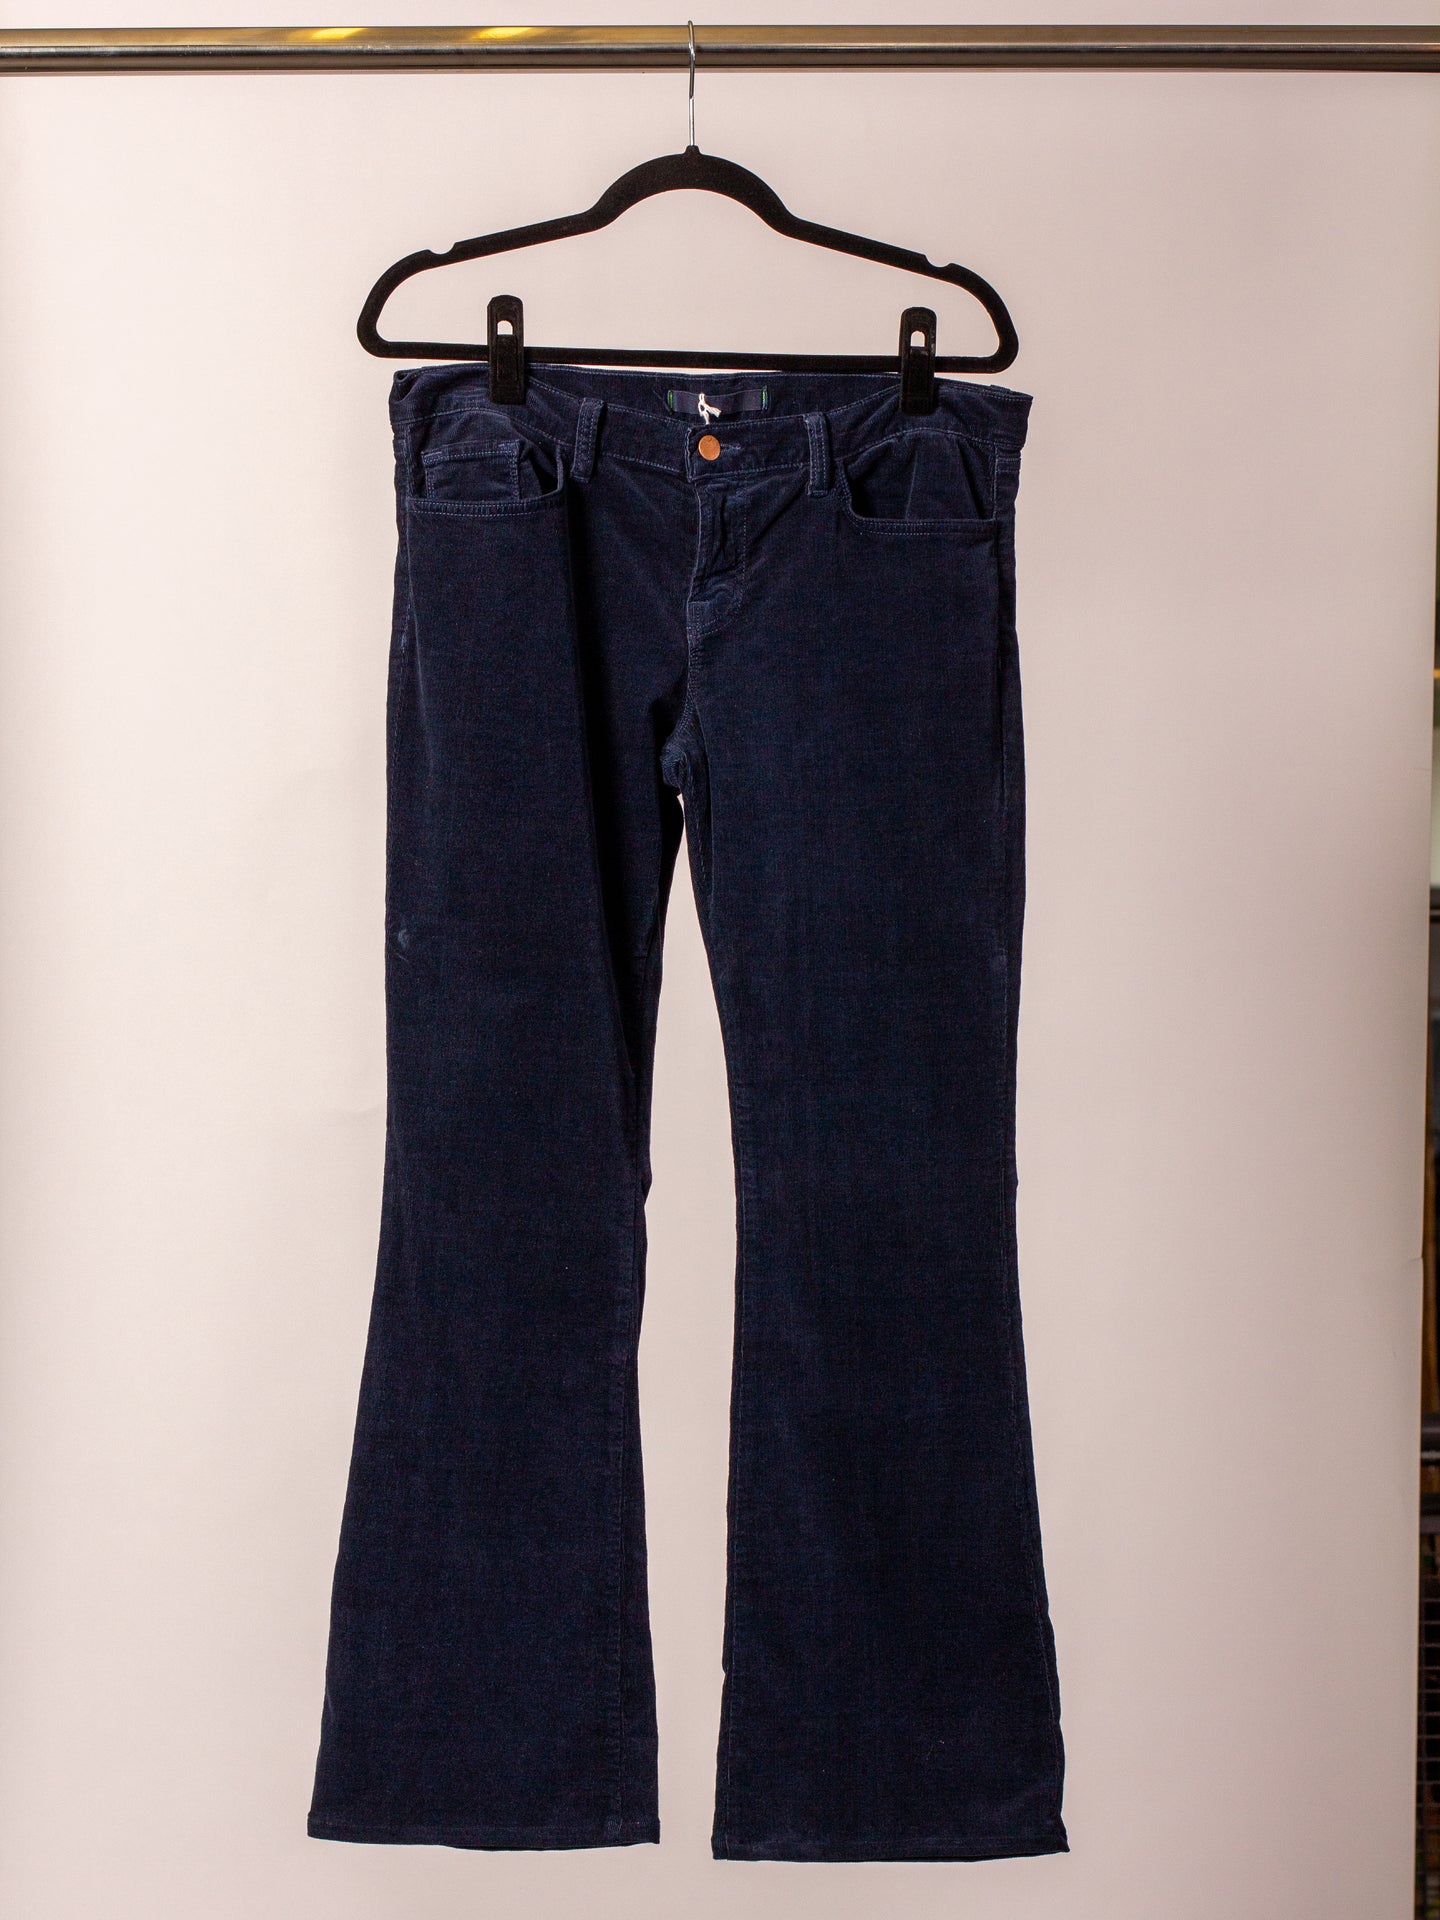 J Brand Upcycled Low Rise Flared Corduroy Pants (sz. 32)